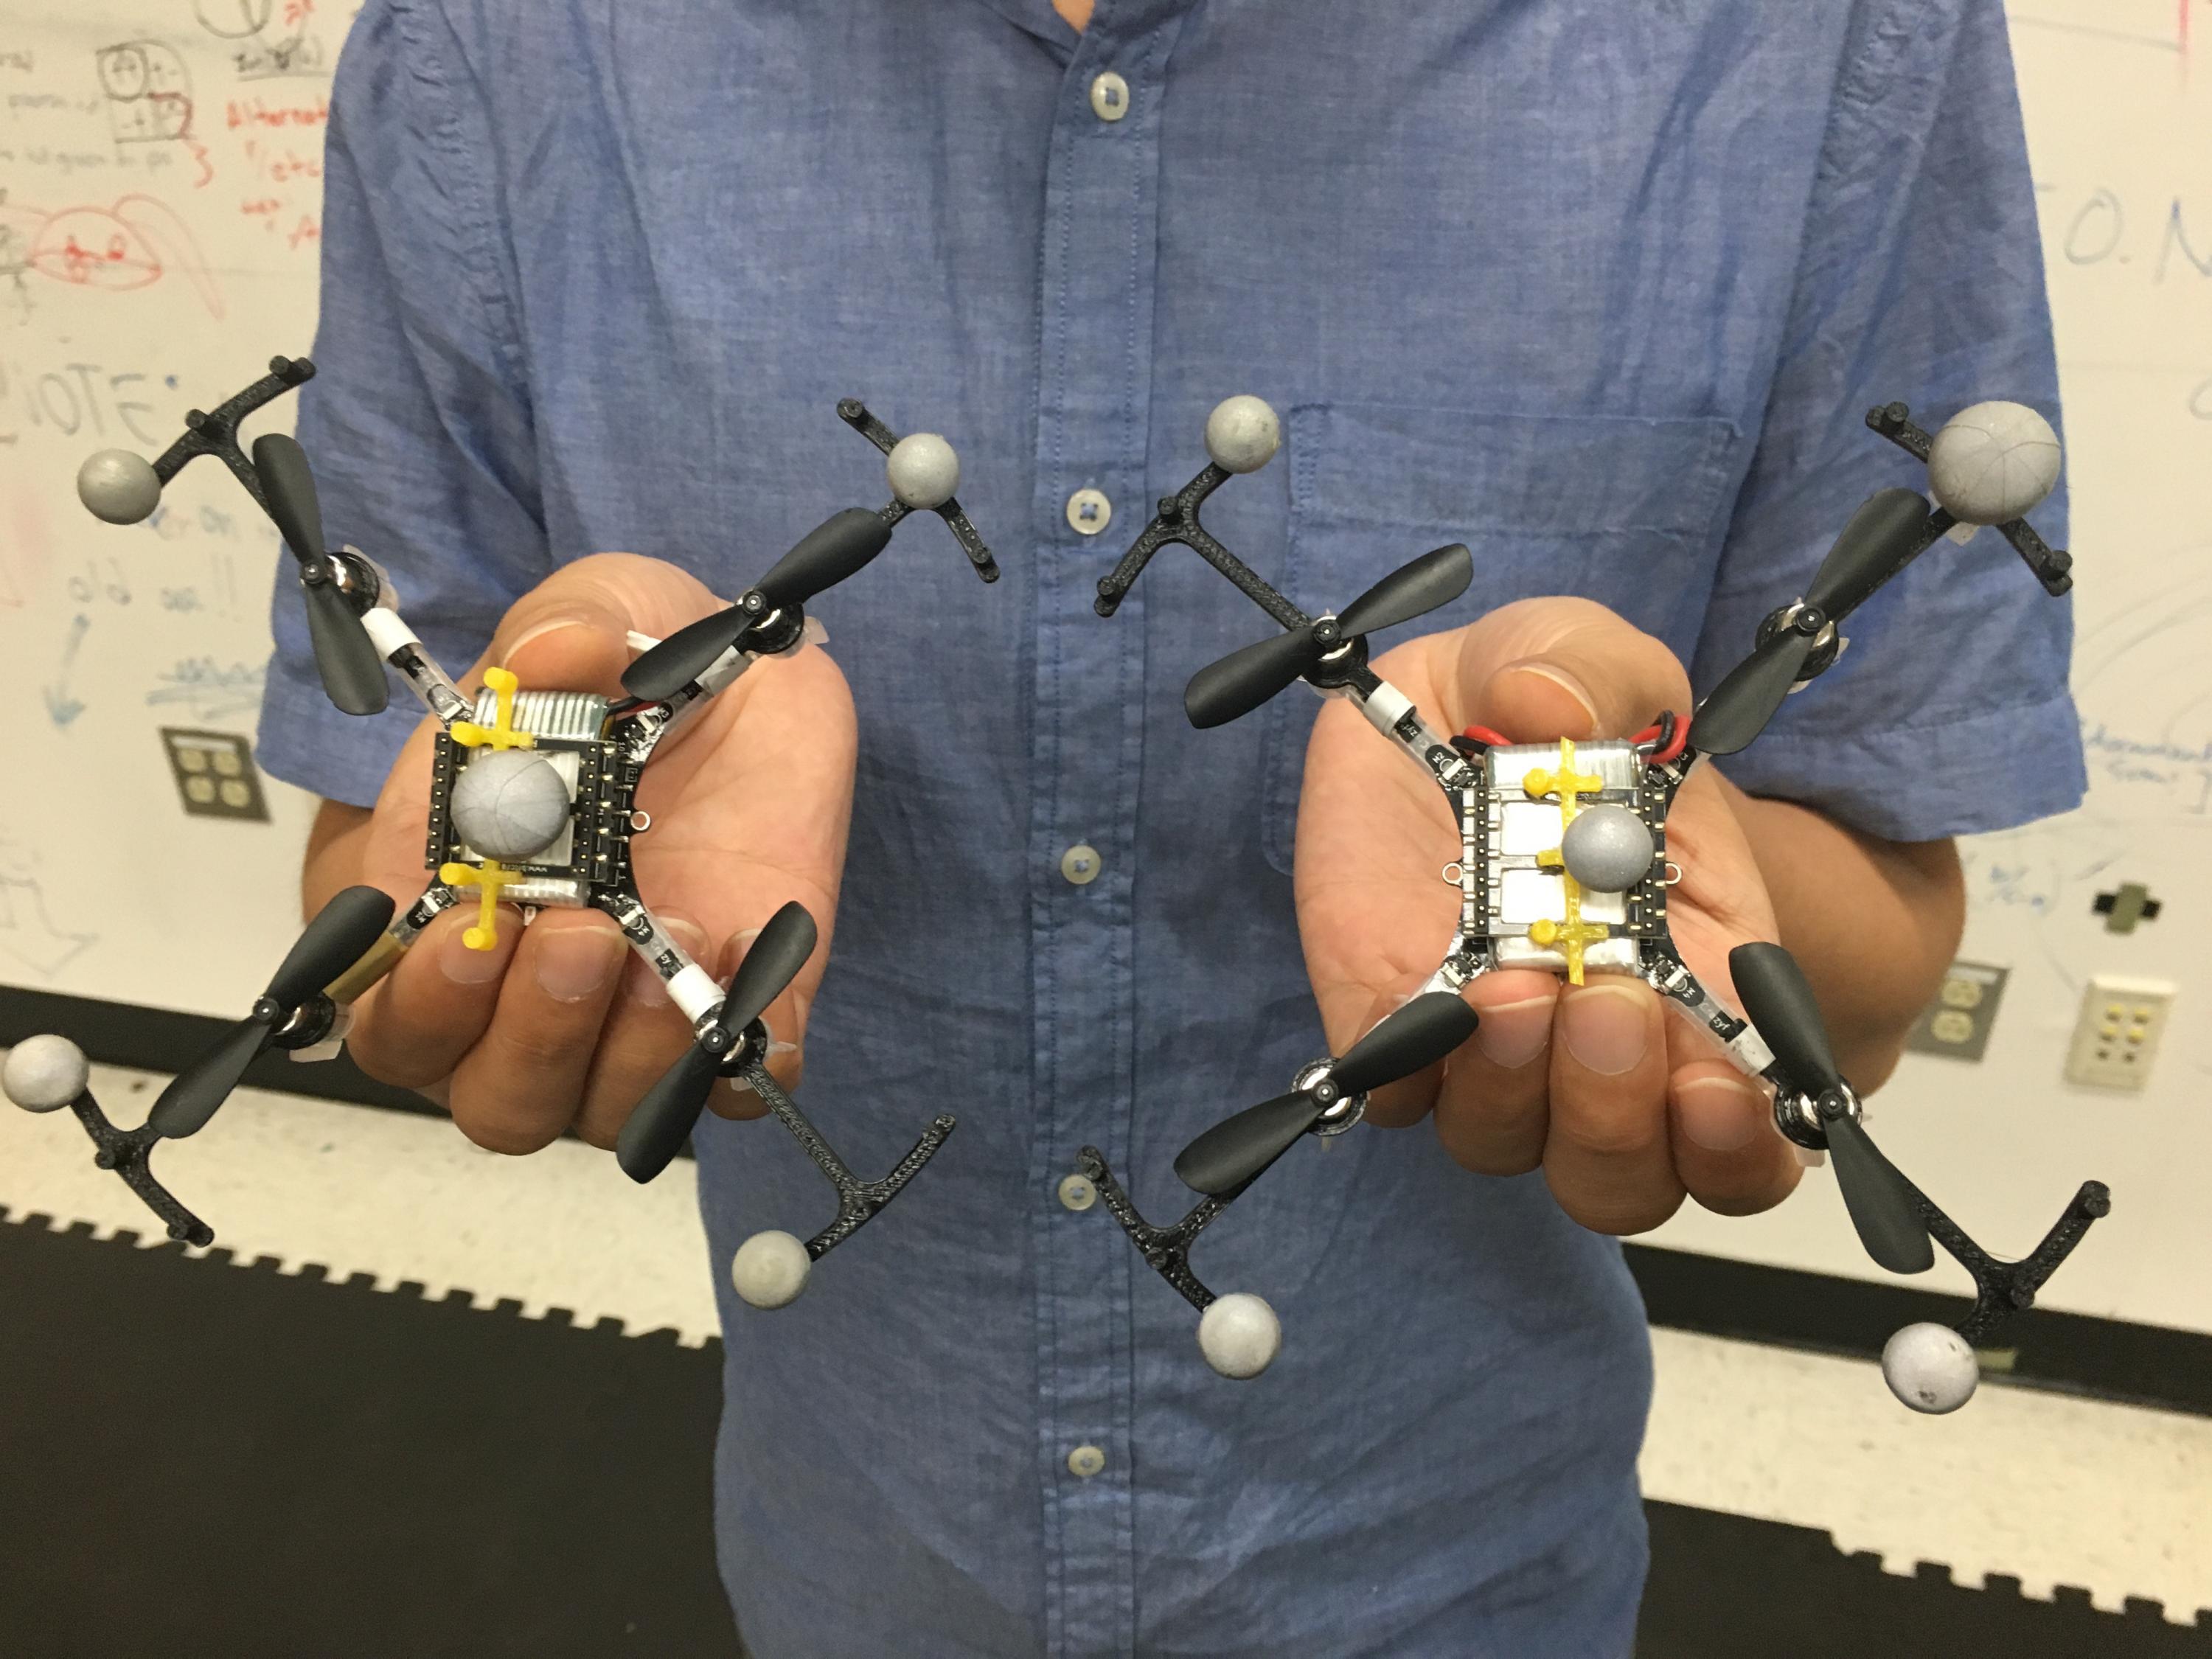 Georgia Tech's GRITS Lab, led by Magnus Egerstedt, has build autonomous quadcopters that can change formation on their own...without crashing.